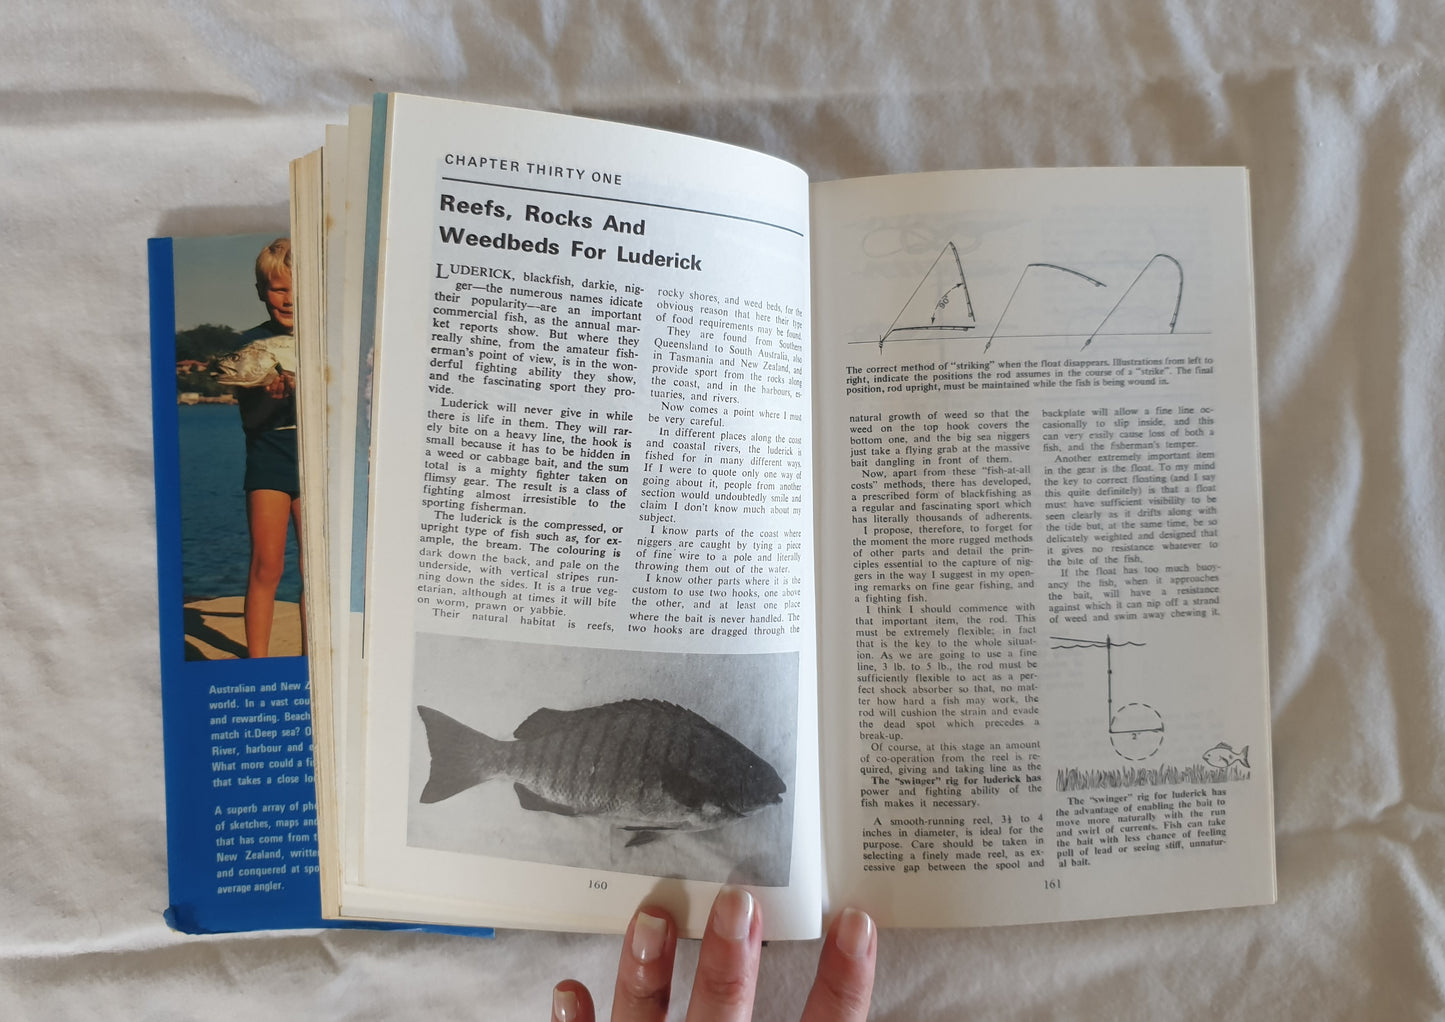 Complete Book of Australian Fishing Edited by Rodger Hungerford